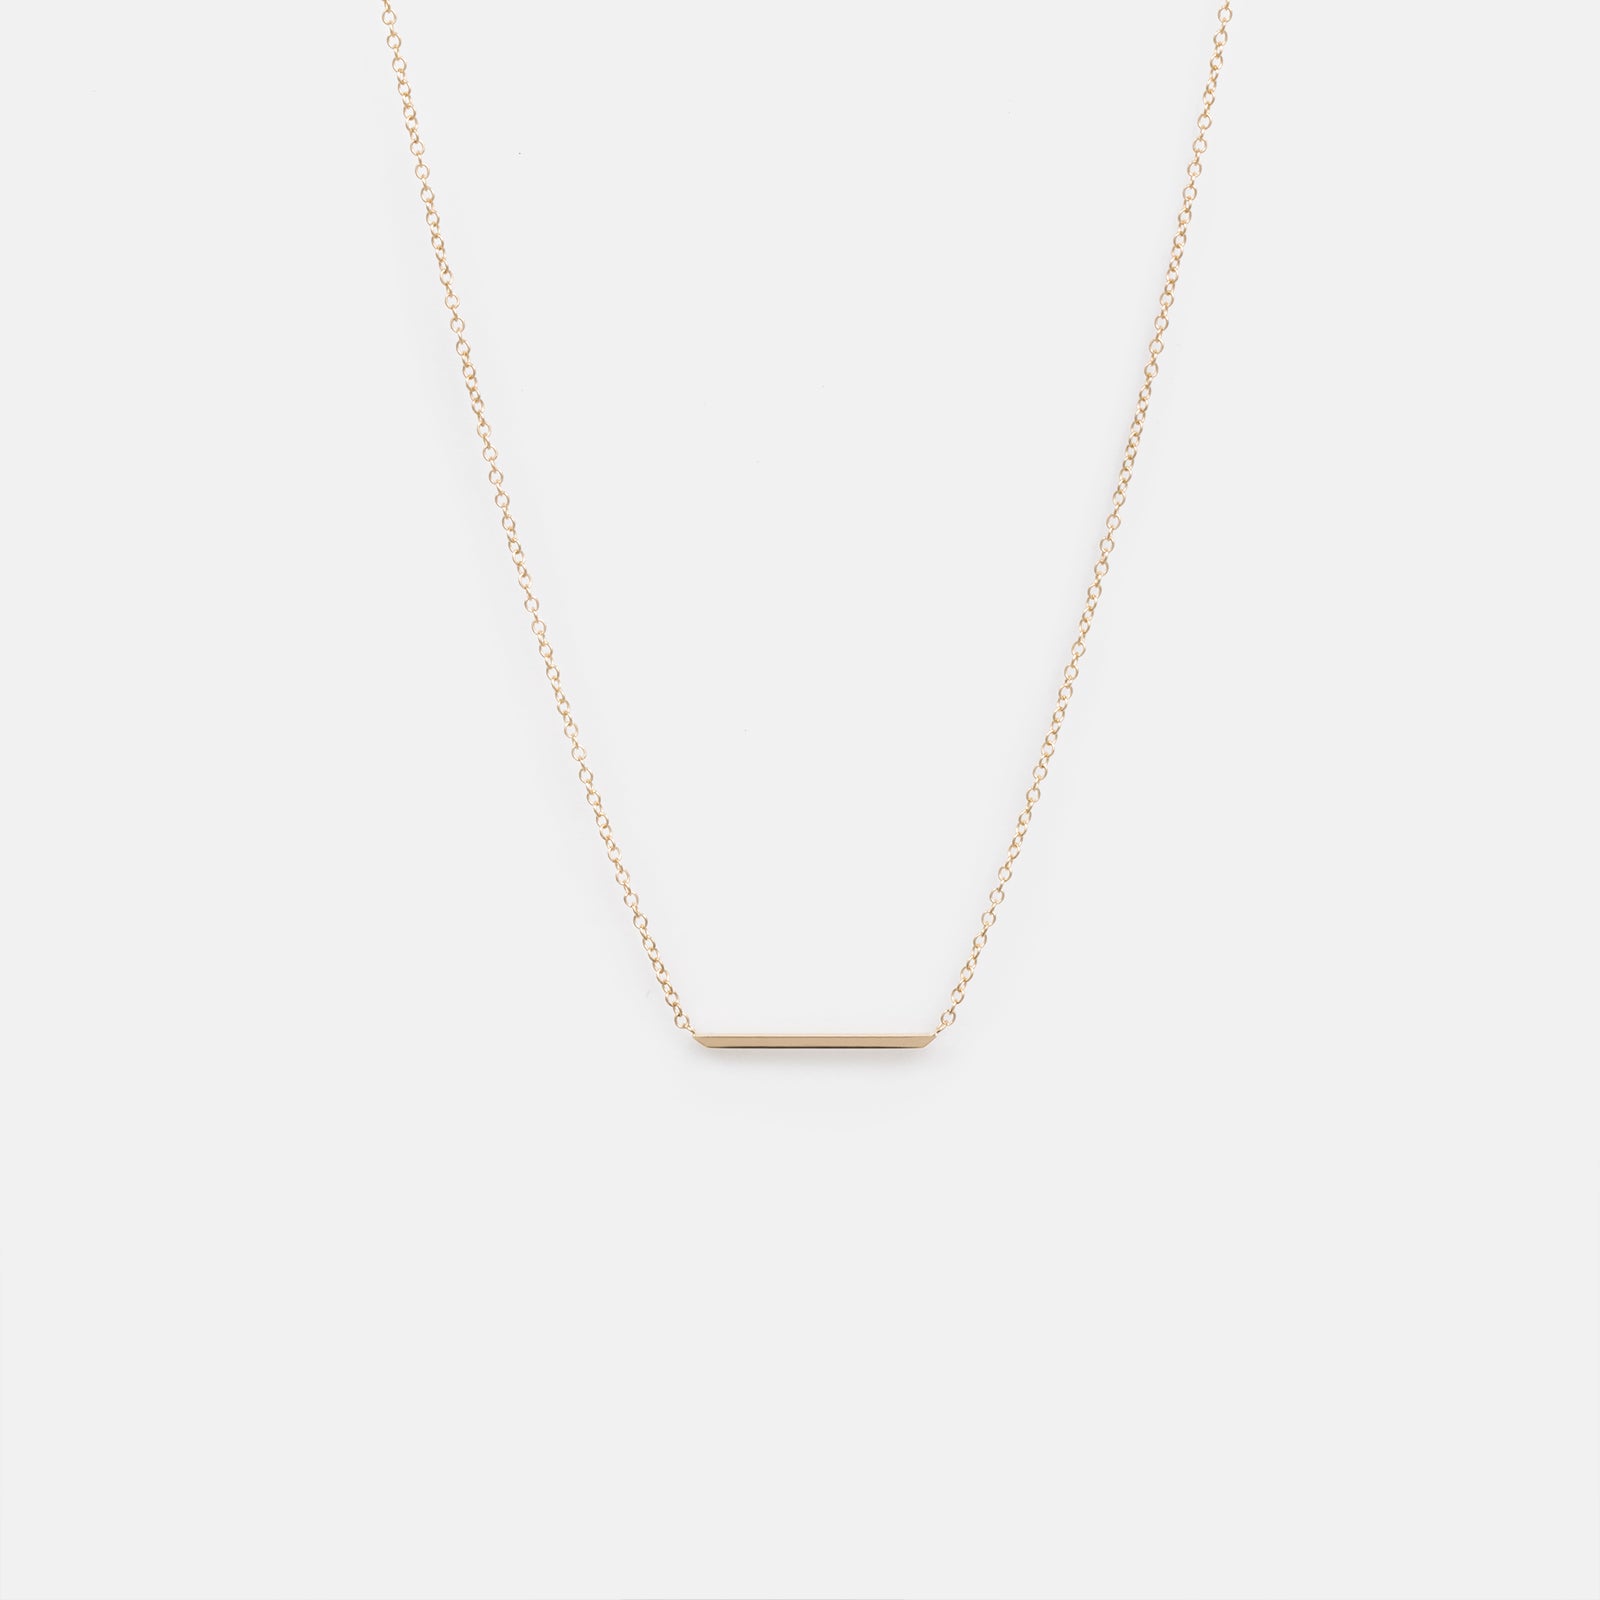 Cool Vati Necklace in 14k Yellow Gold by SHW Fine Jewelry Made in NYC